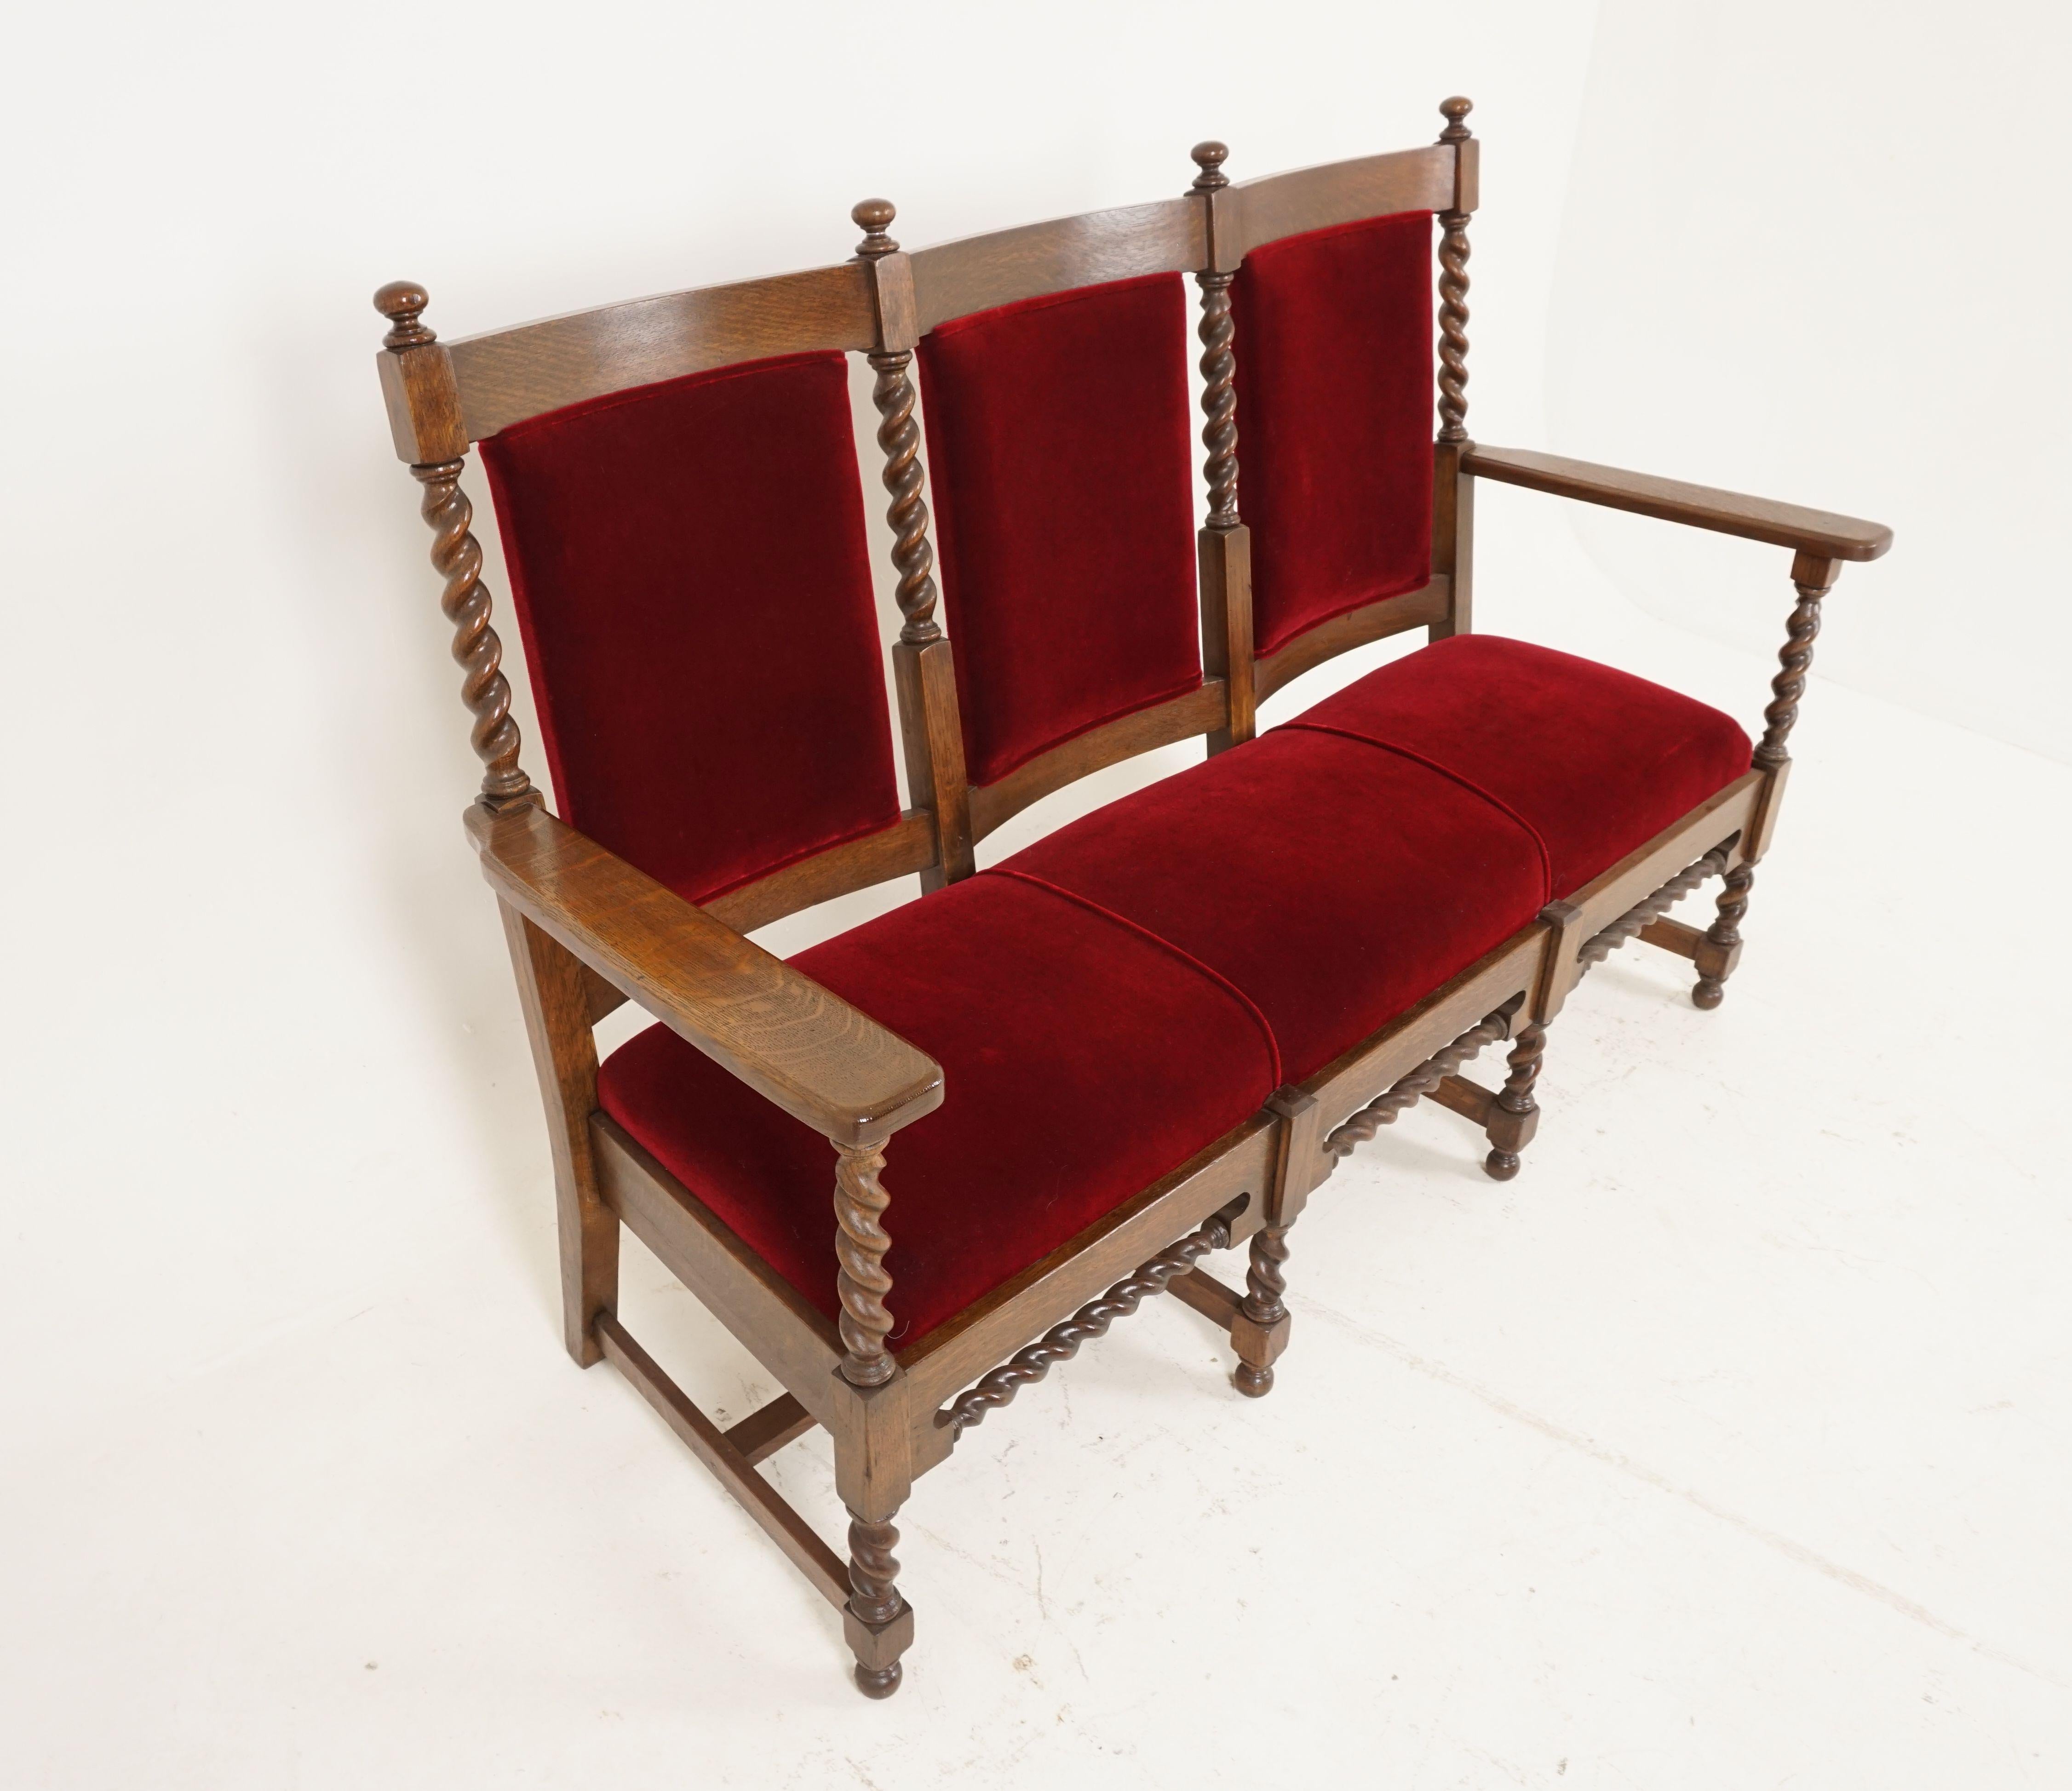 Antique oak sofa, Jacobean style Barley twist three-seat settee, Chaises, 1890s, H116

Scotland, 1890
Solid oak
Original finish
Top carved rail with turned finial to the top of the uprights
Padded backs with burgundy upholstery
Drop in padded